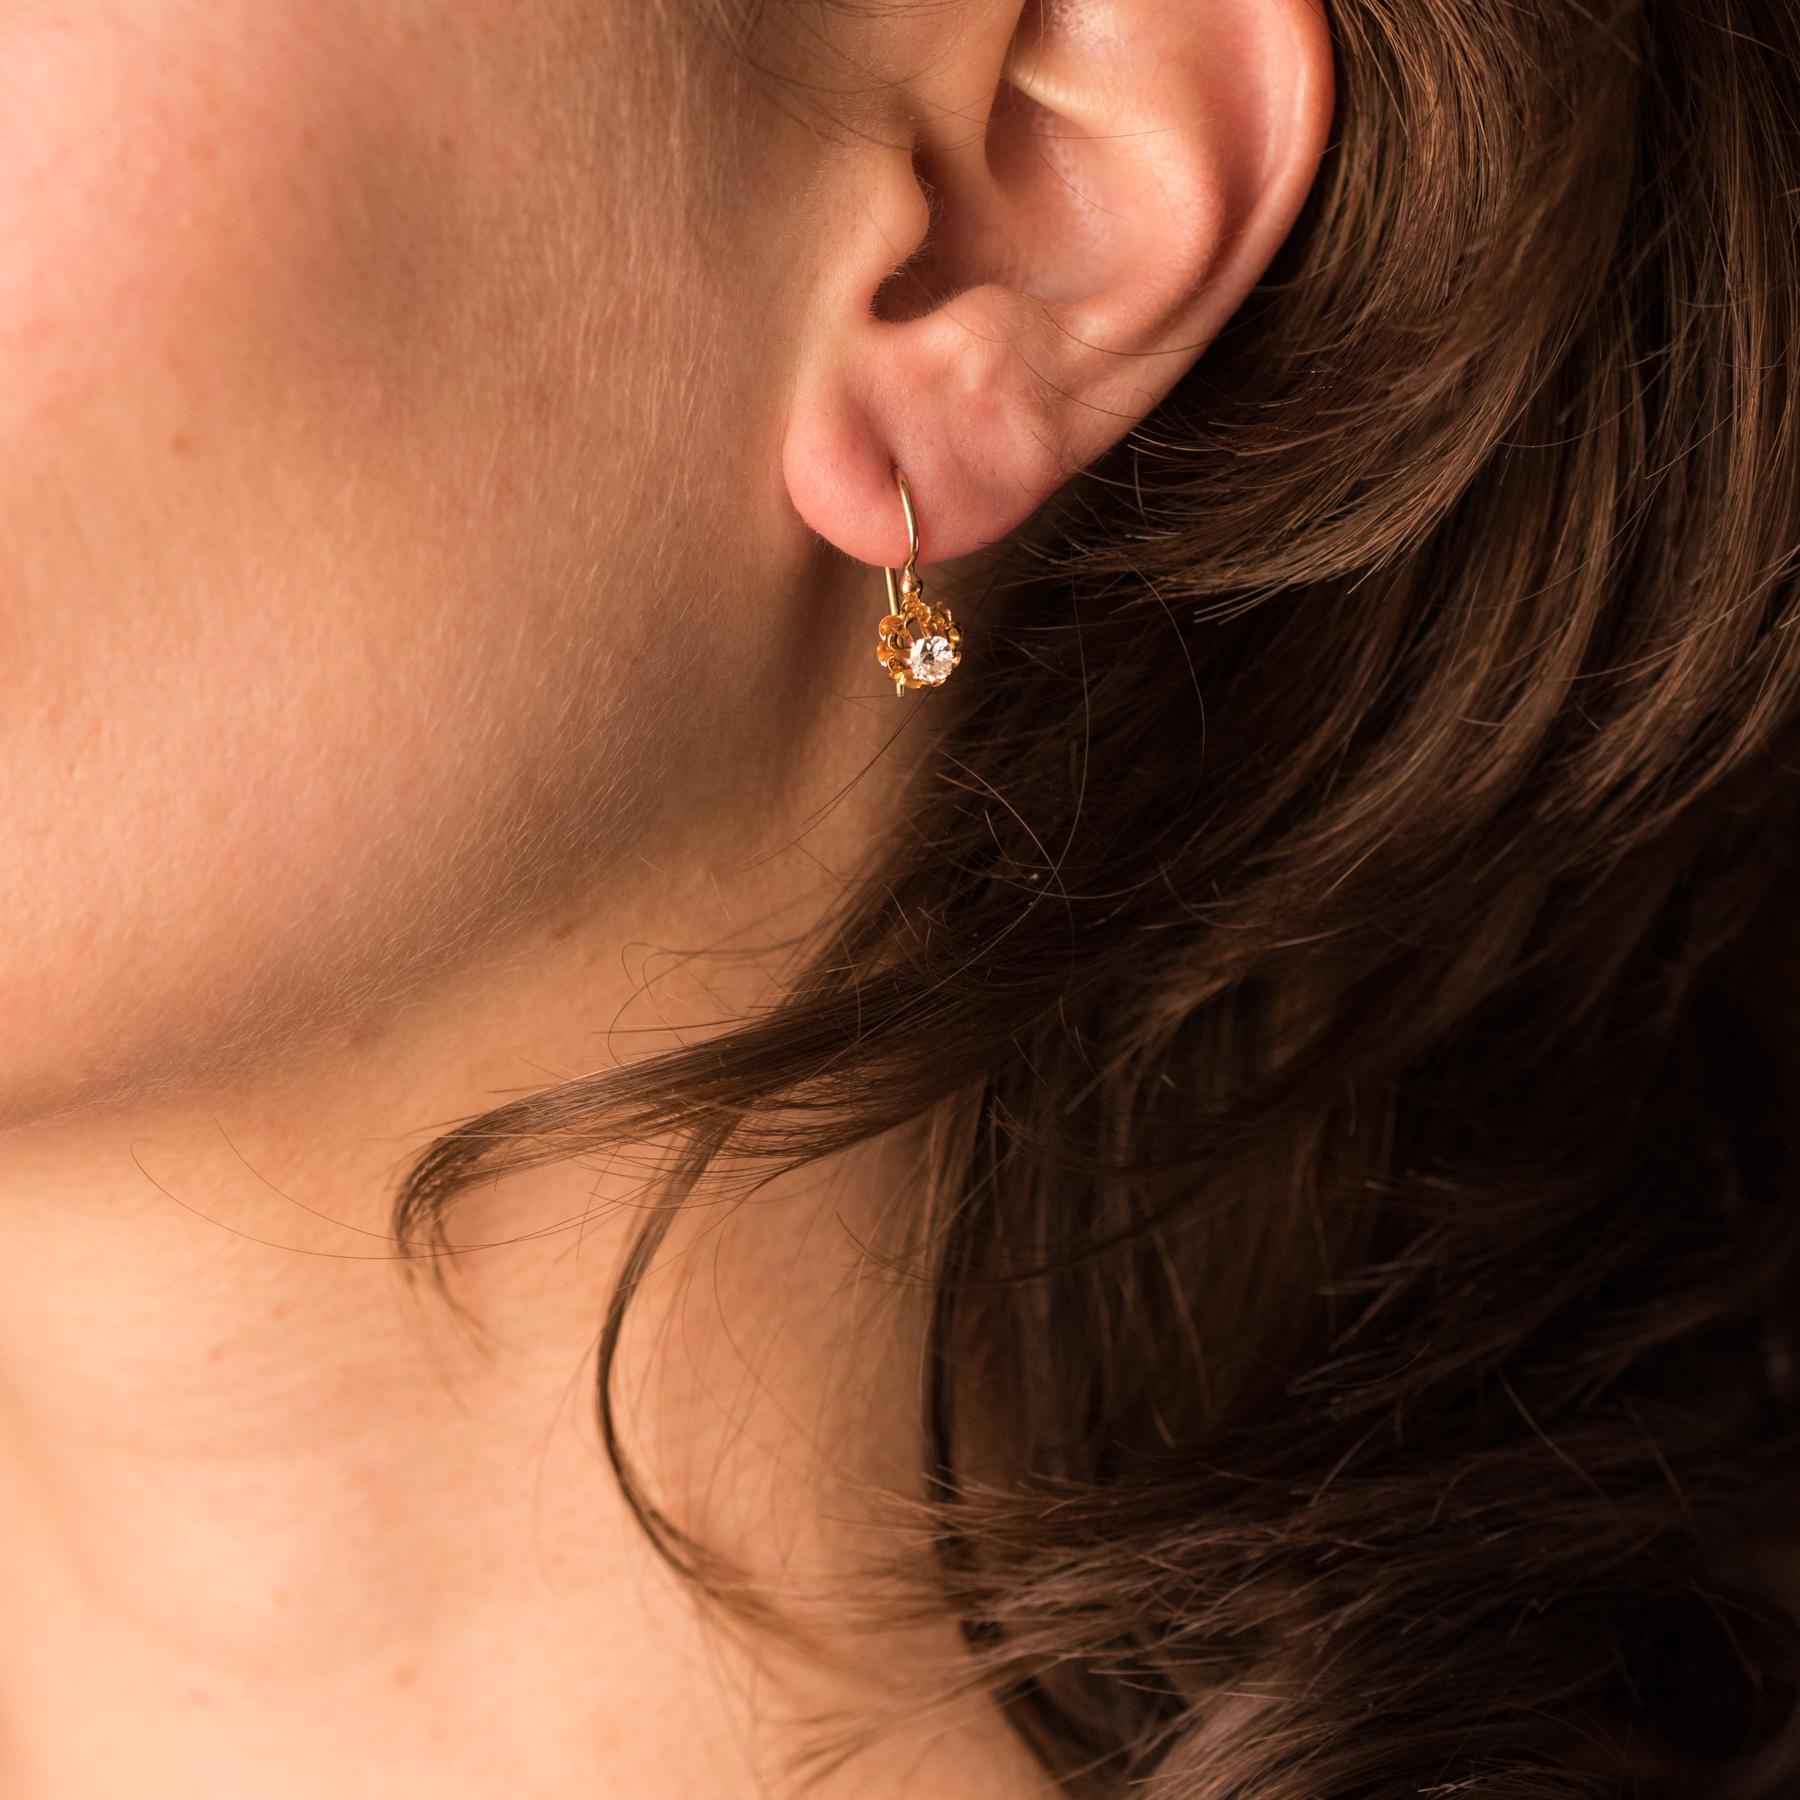 Earrings in 18 karats yellow gold.
Bright and refined, each earring is set with claws of an antique cushion- cut diamond. The clasp is a gooseneck with safety hook and puts on from the front.
Total weight of diamonds: approximately 0.32